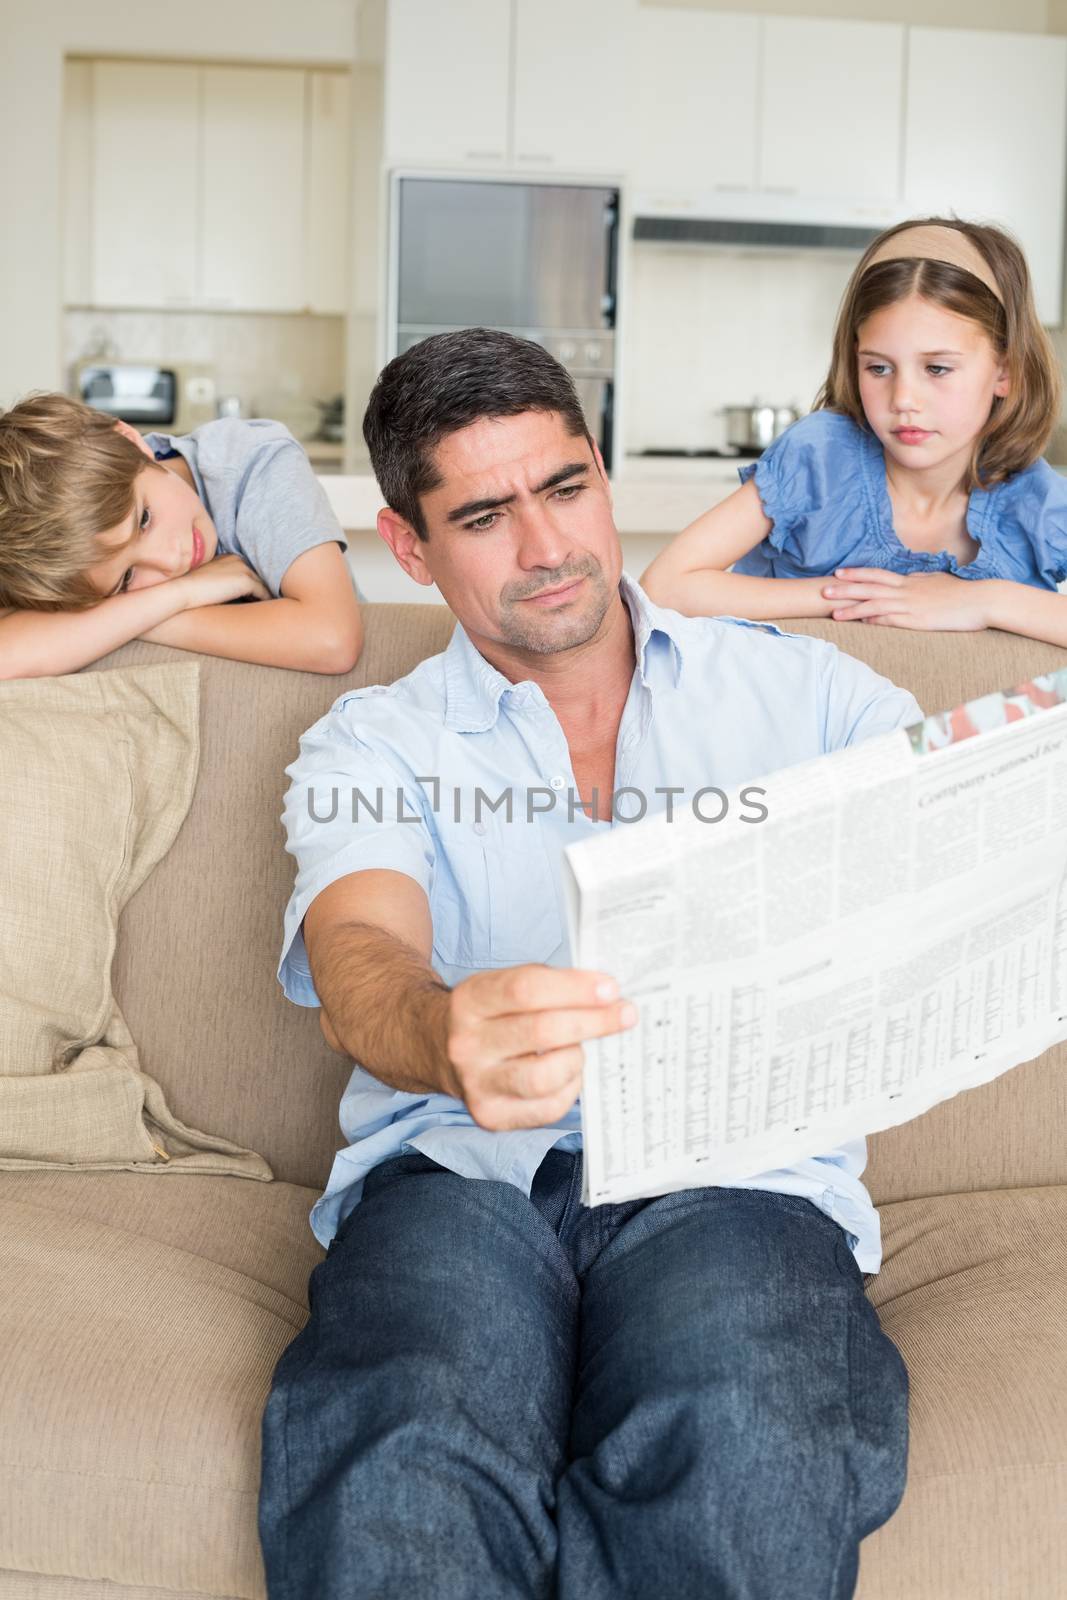 Bored children looking at father reading newspaper in house